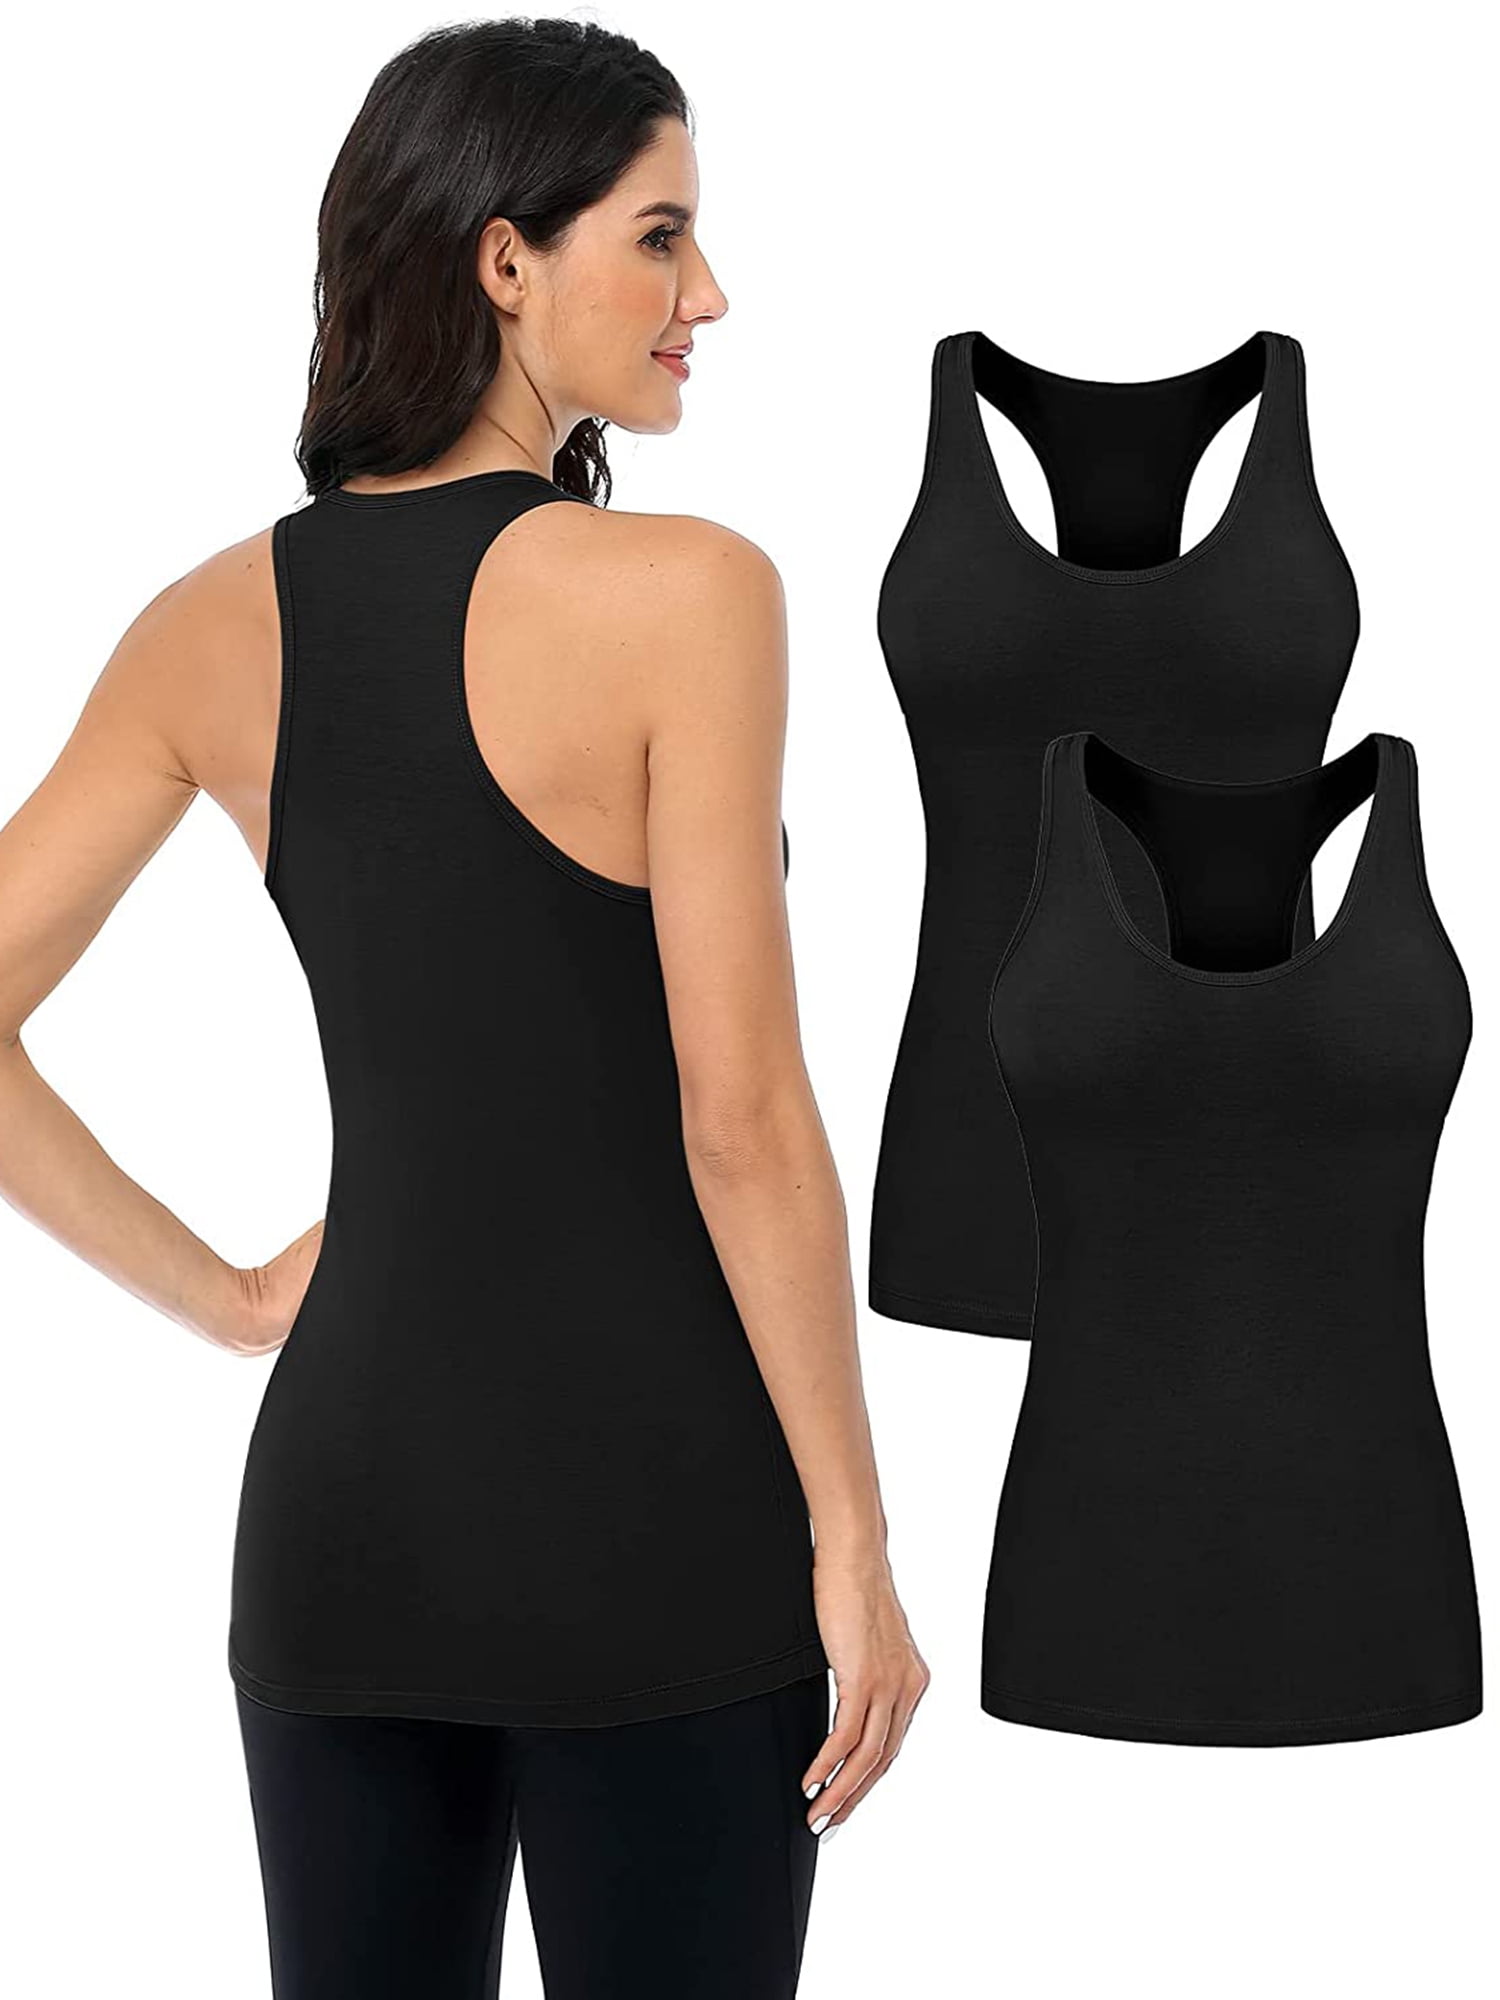 Charmo Tank Tops for Women Cotton Racerback Fitted Workout